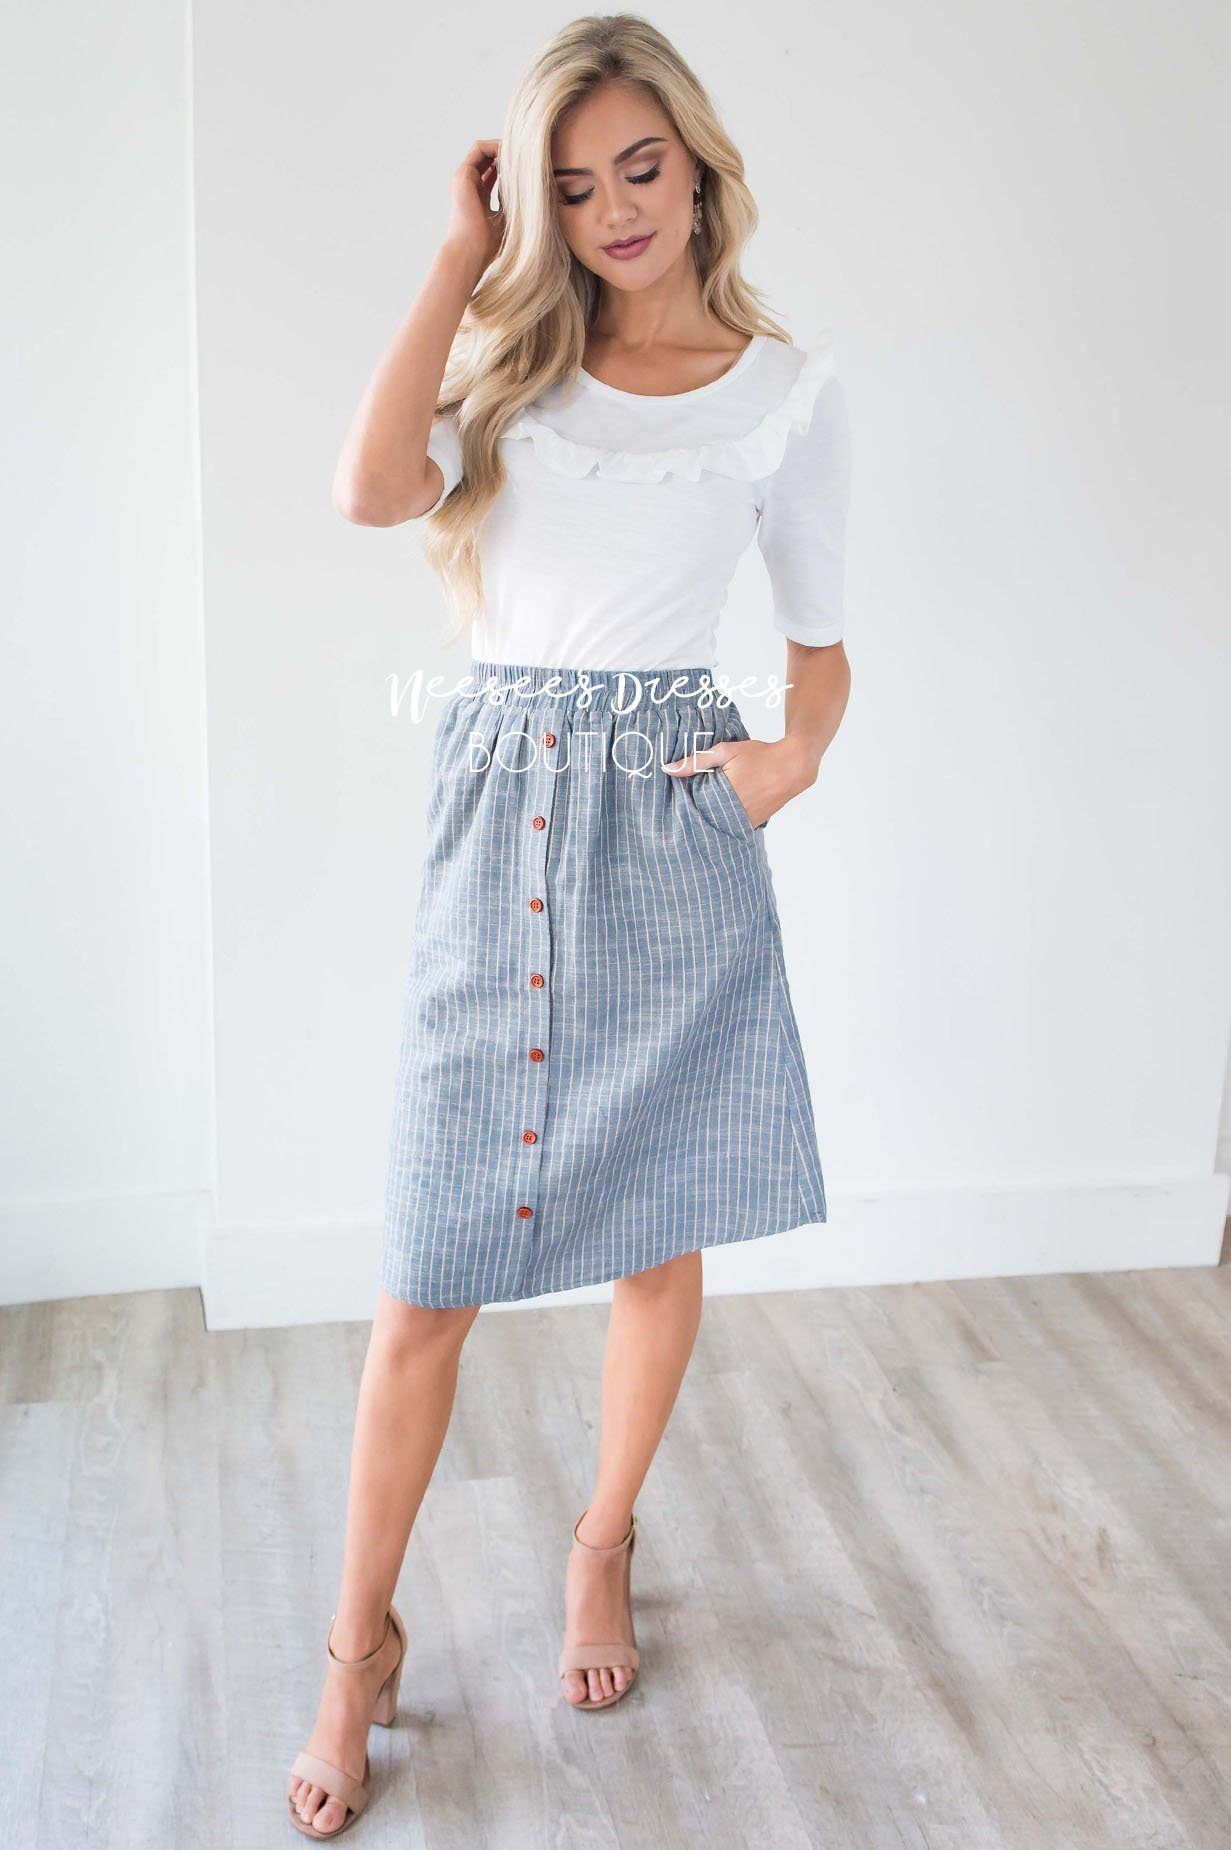 Skirts - Skirts -   19 fitness Outfits modest ideas